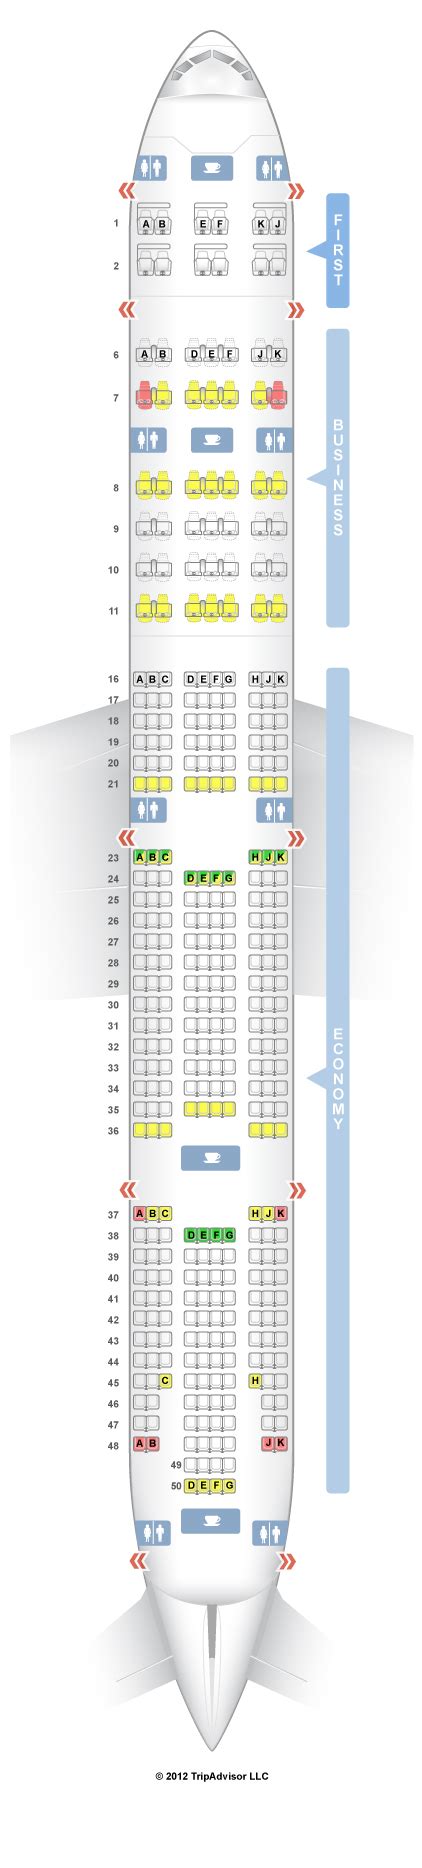 Emirates Boeing Seat Map Hot Sex Picture